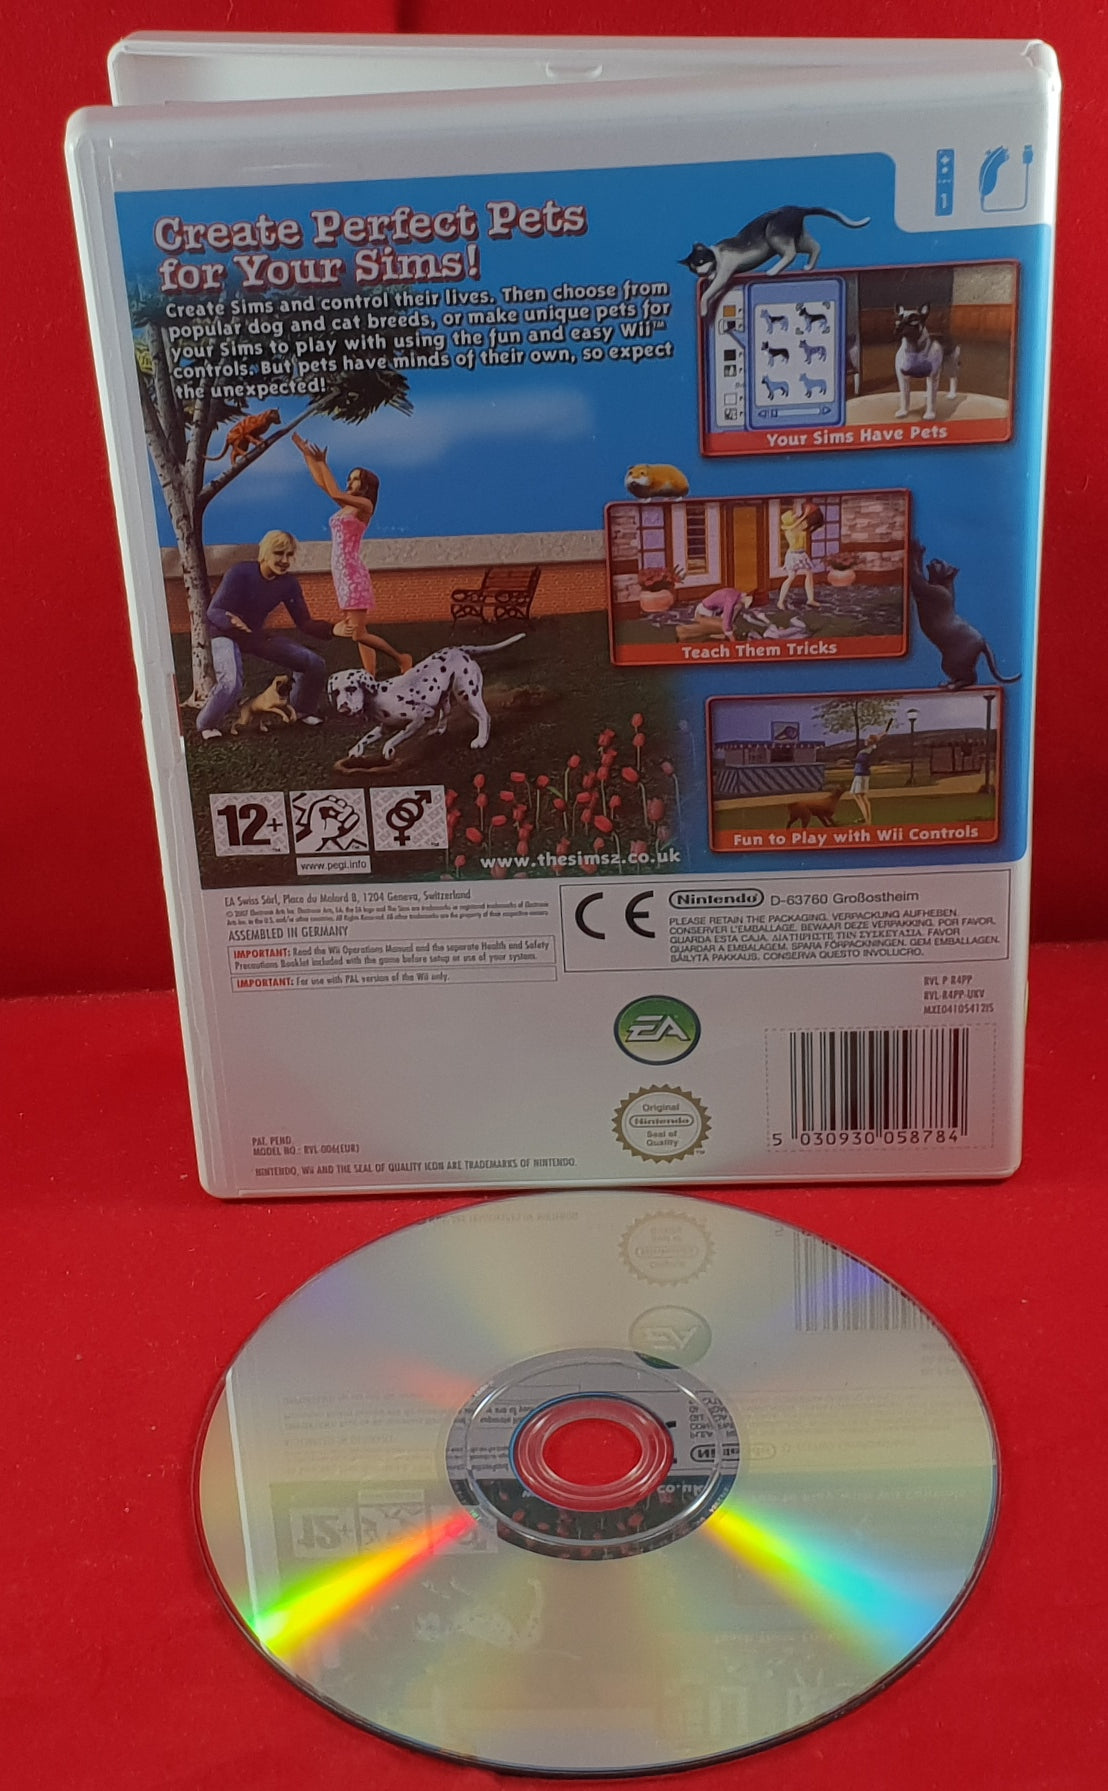 The Sims 2 Pets Nintendo Wii Game